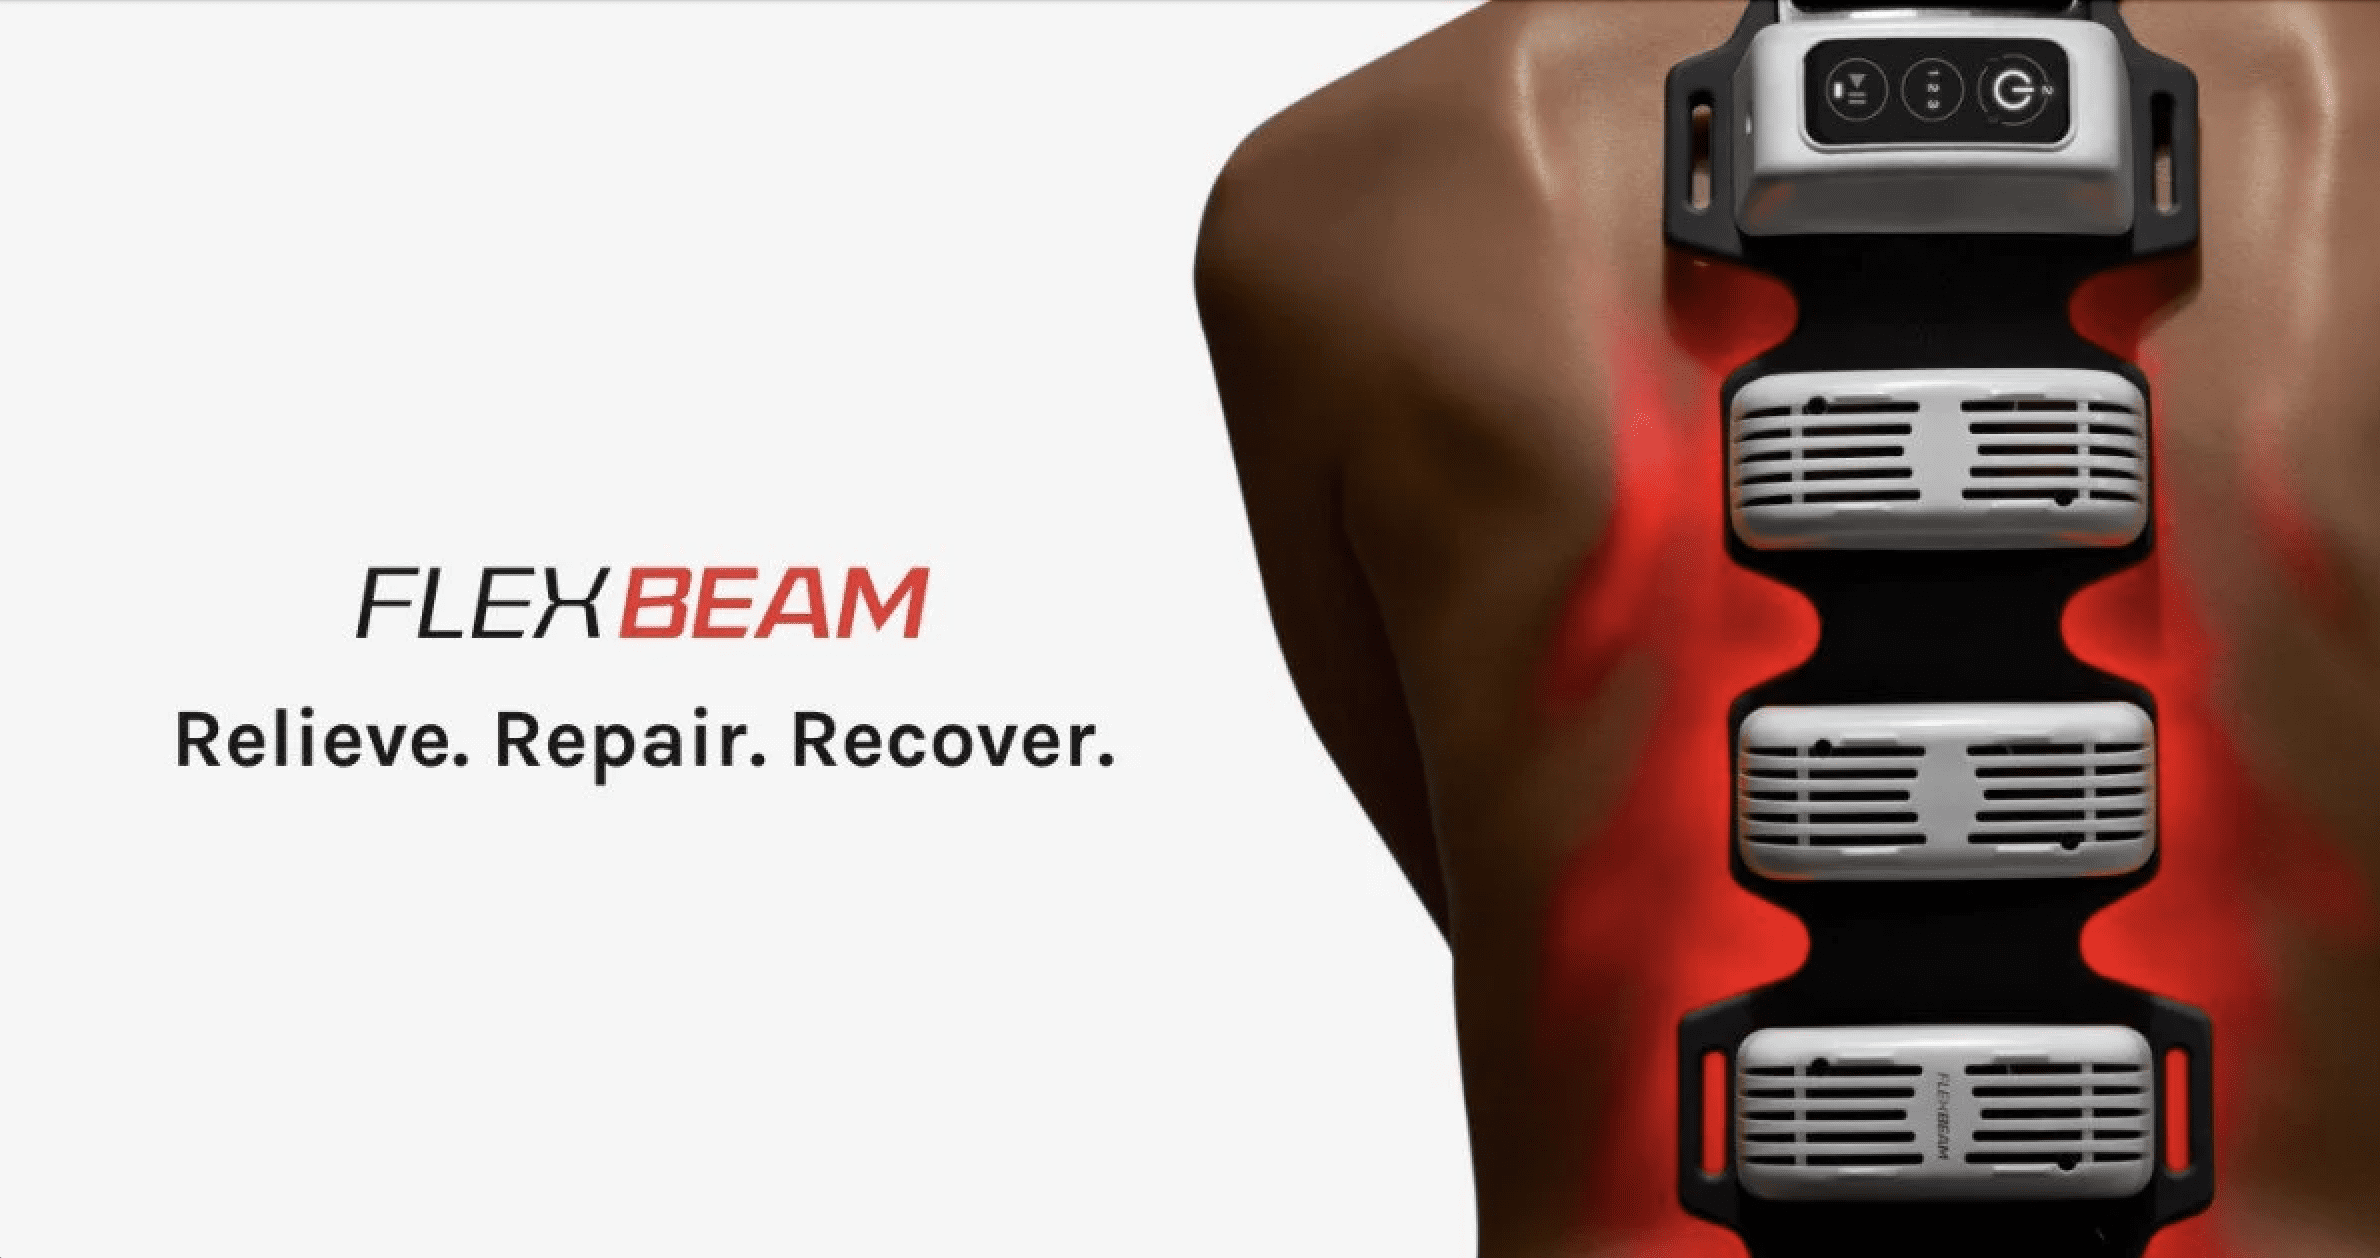 Image source: Recharge Health, FlexBeam - The world's first targeted portable red light therapy device KellyOnTech